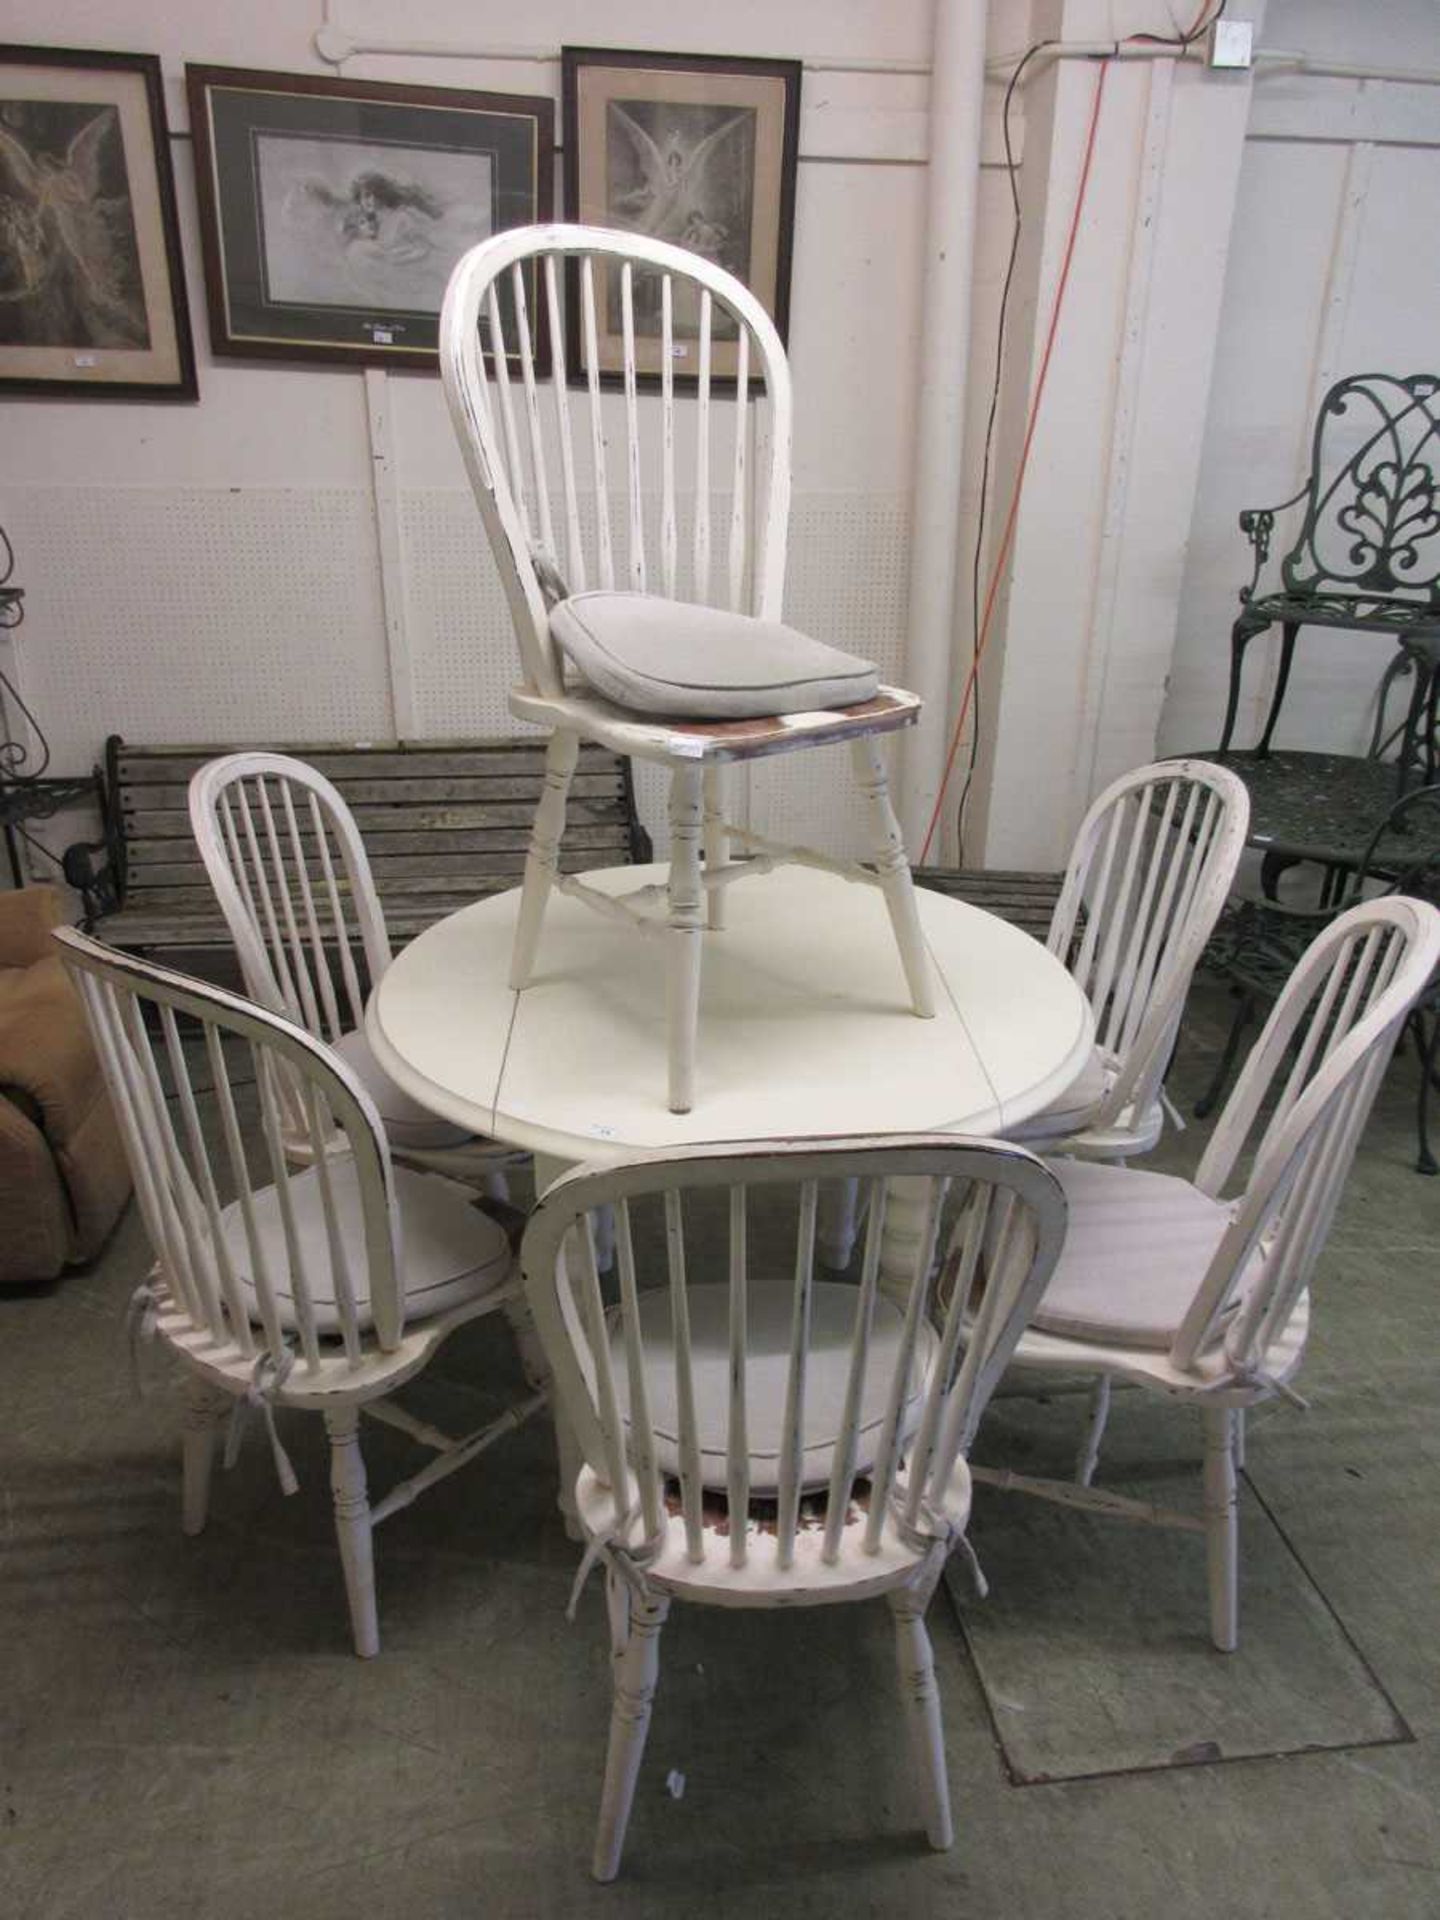 A white circular dropleaf kitchen table together with a set of six painted stick back chairs